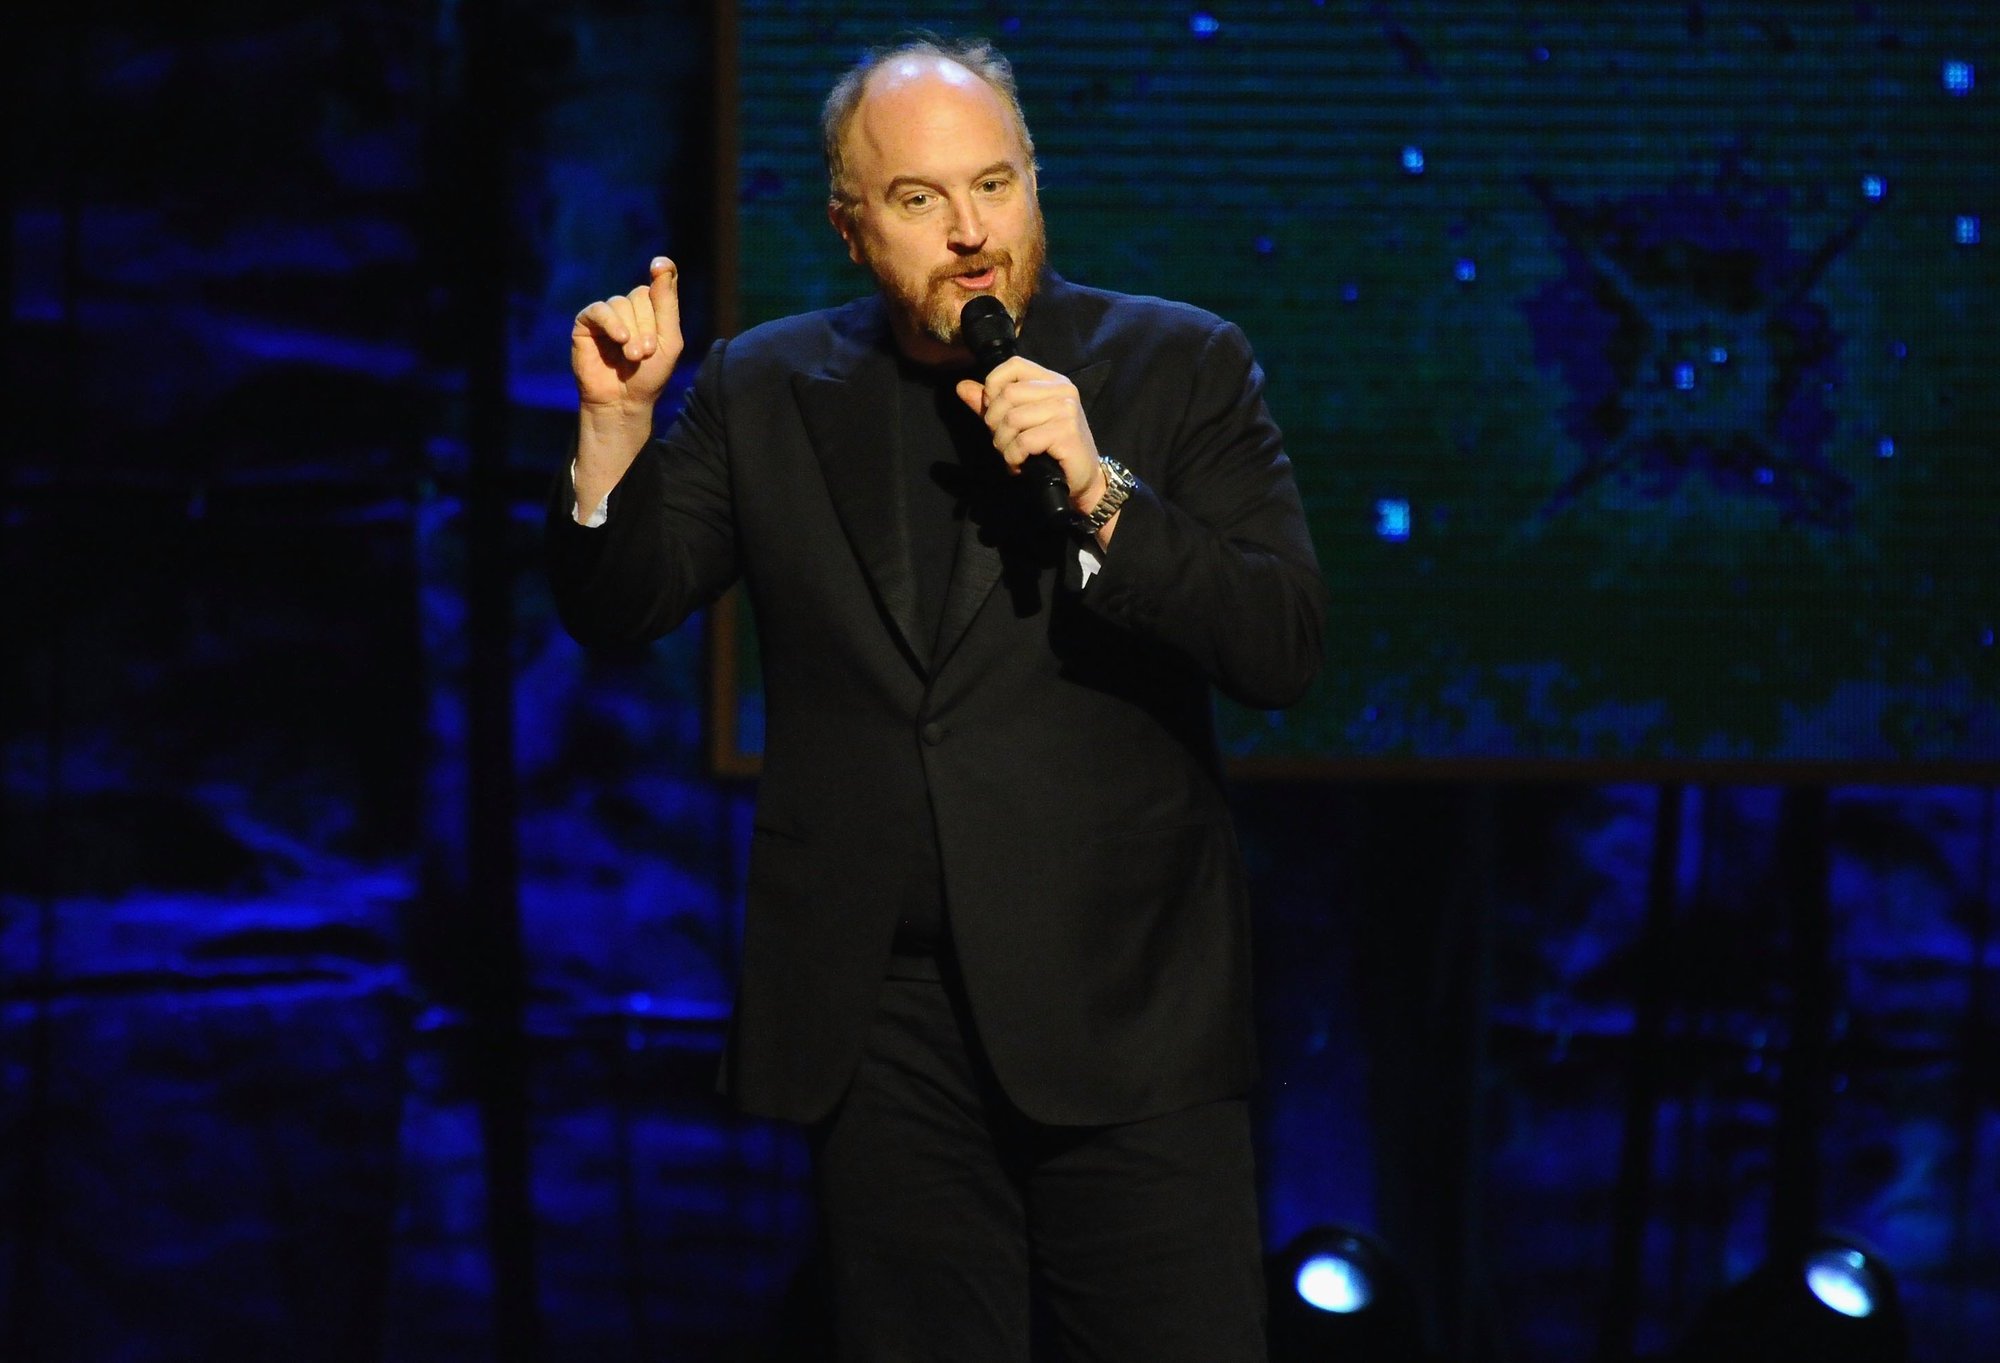 Louis C.K. Crossed a Line Into Sexual Misconduct, 5 Women Say – Patrick Reads